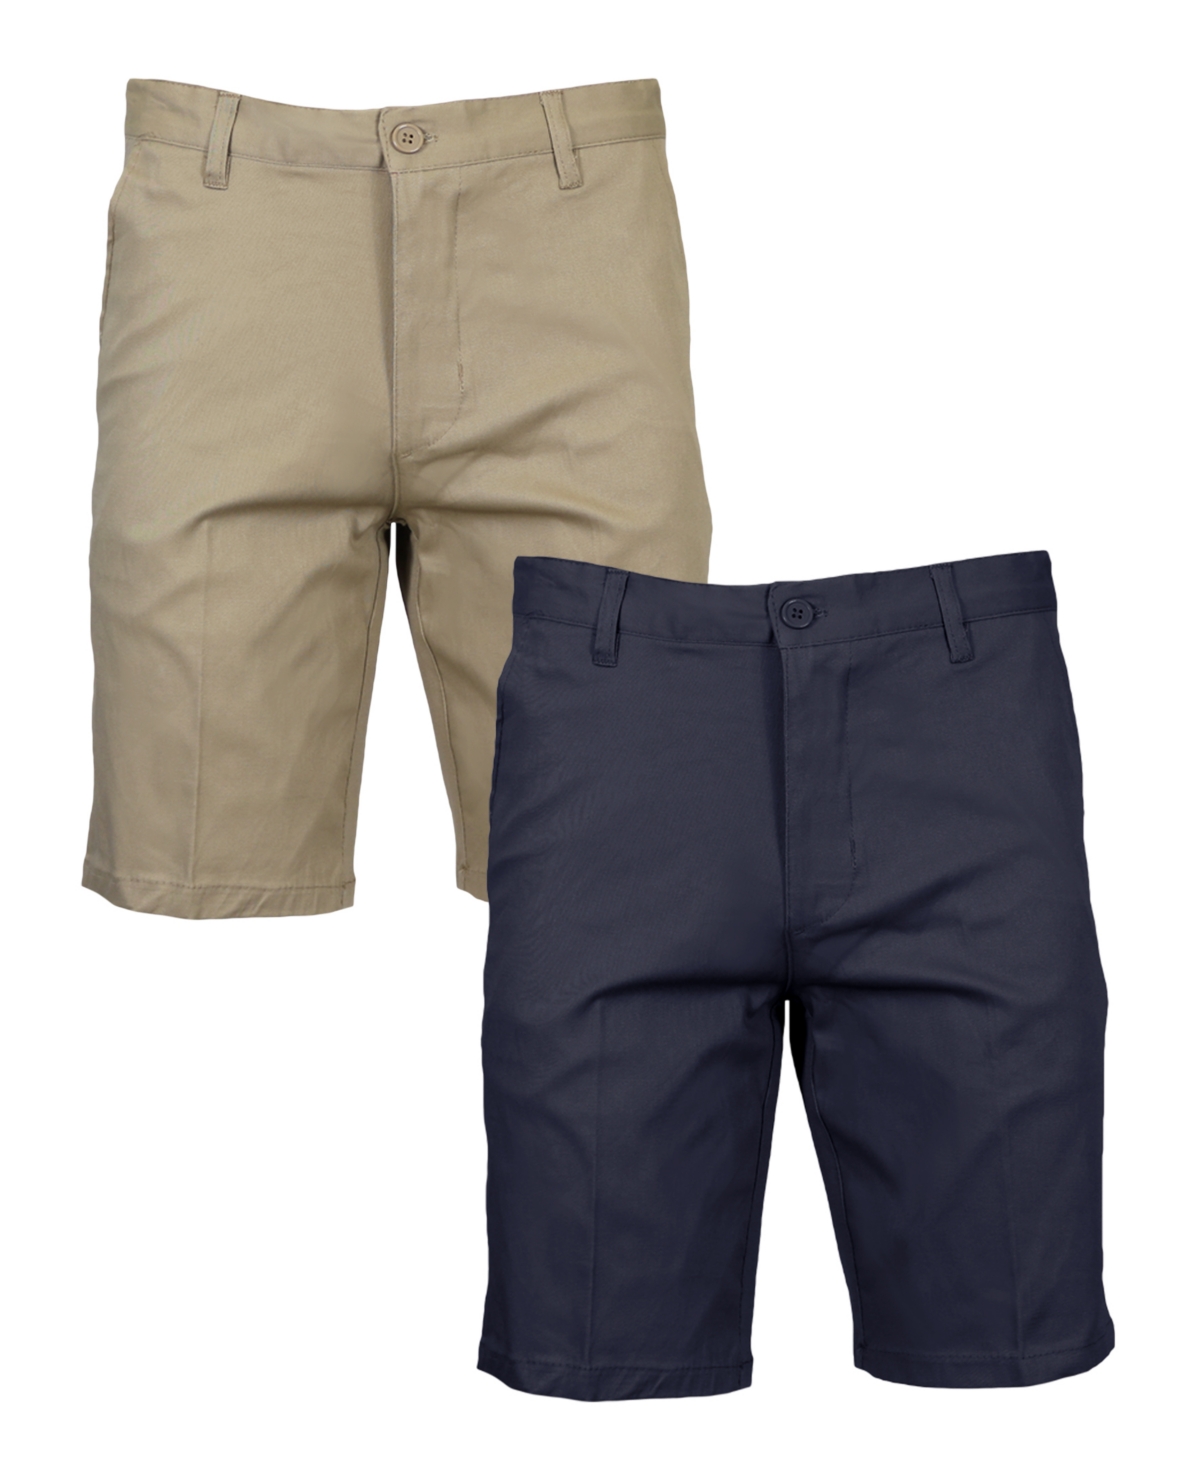 Galaxy By Harvic Men's Slim Fitting Cotton Flex Stretch Chino Shorts, Pack Of 2 In Khaki Navy